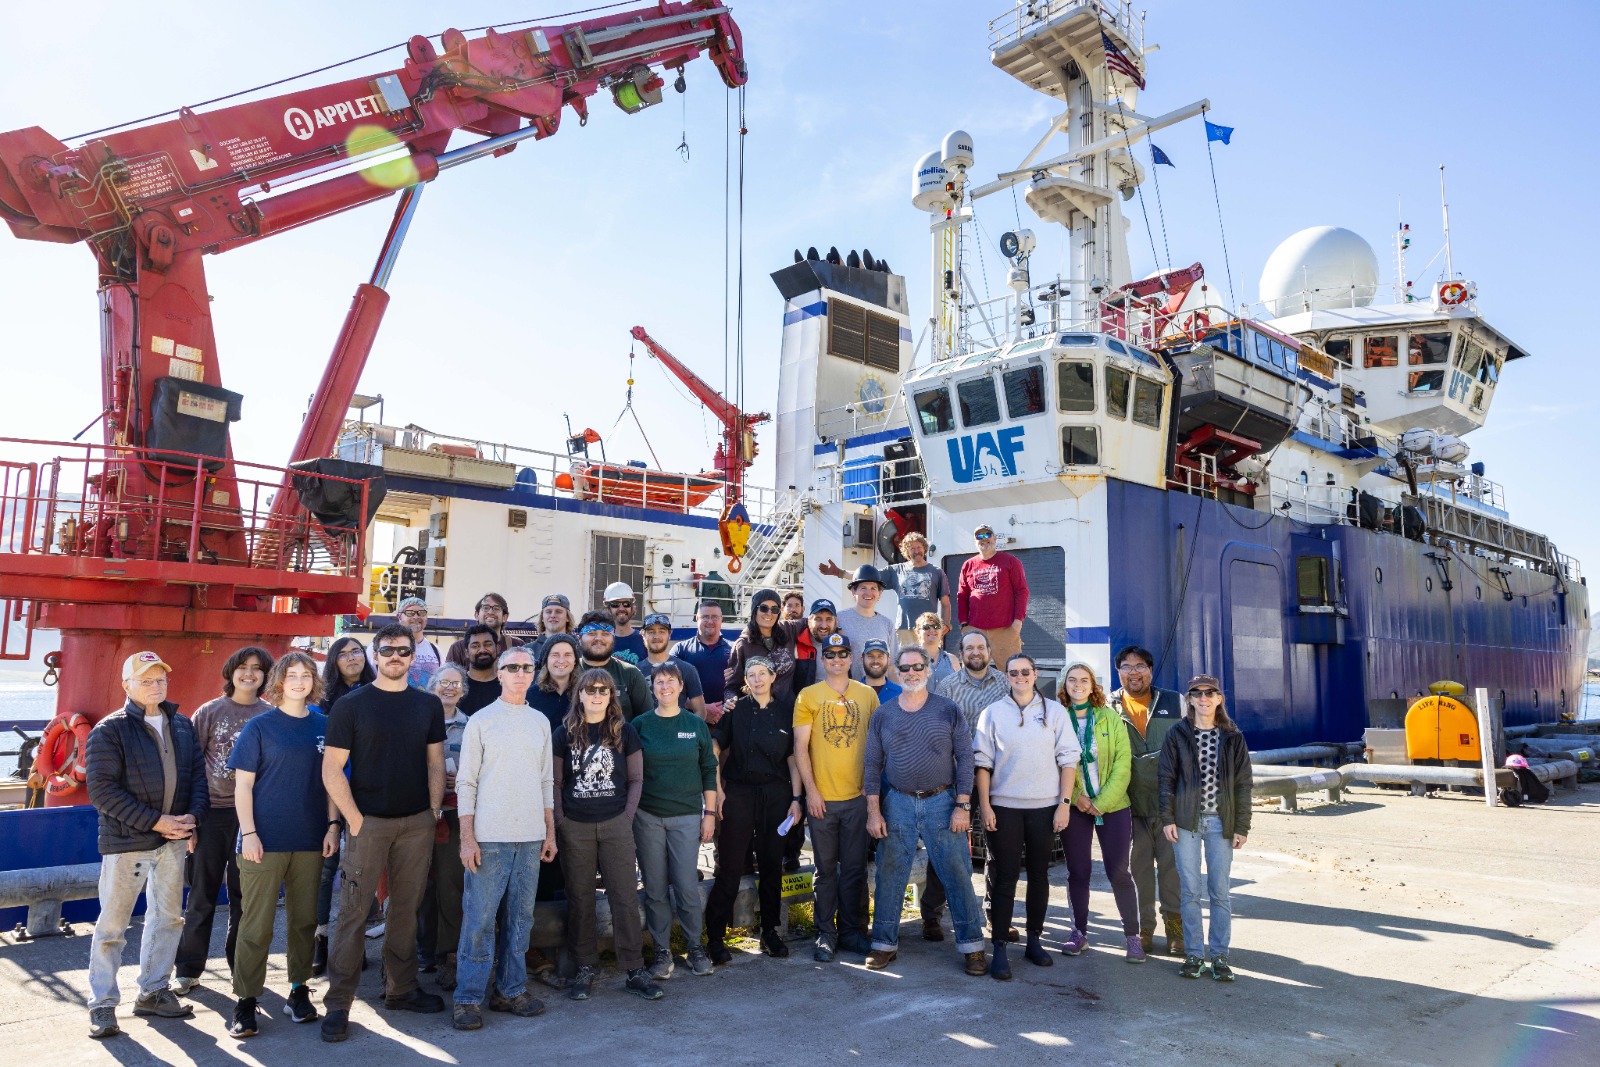 crew standing in front of r/v Sikuliaq (boat)